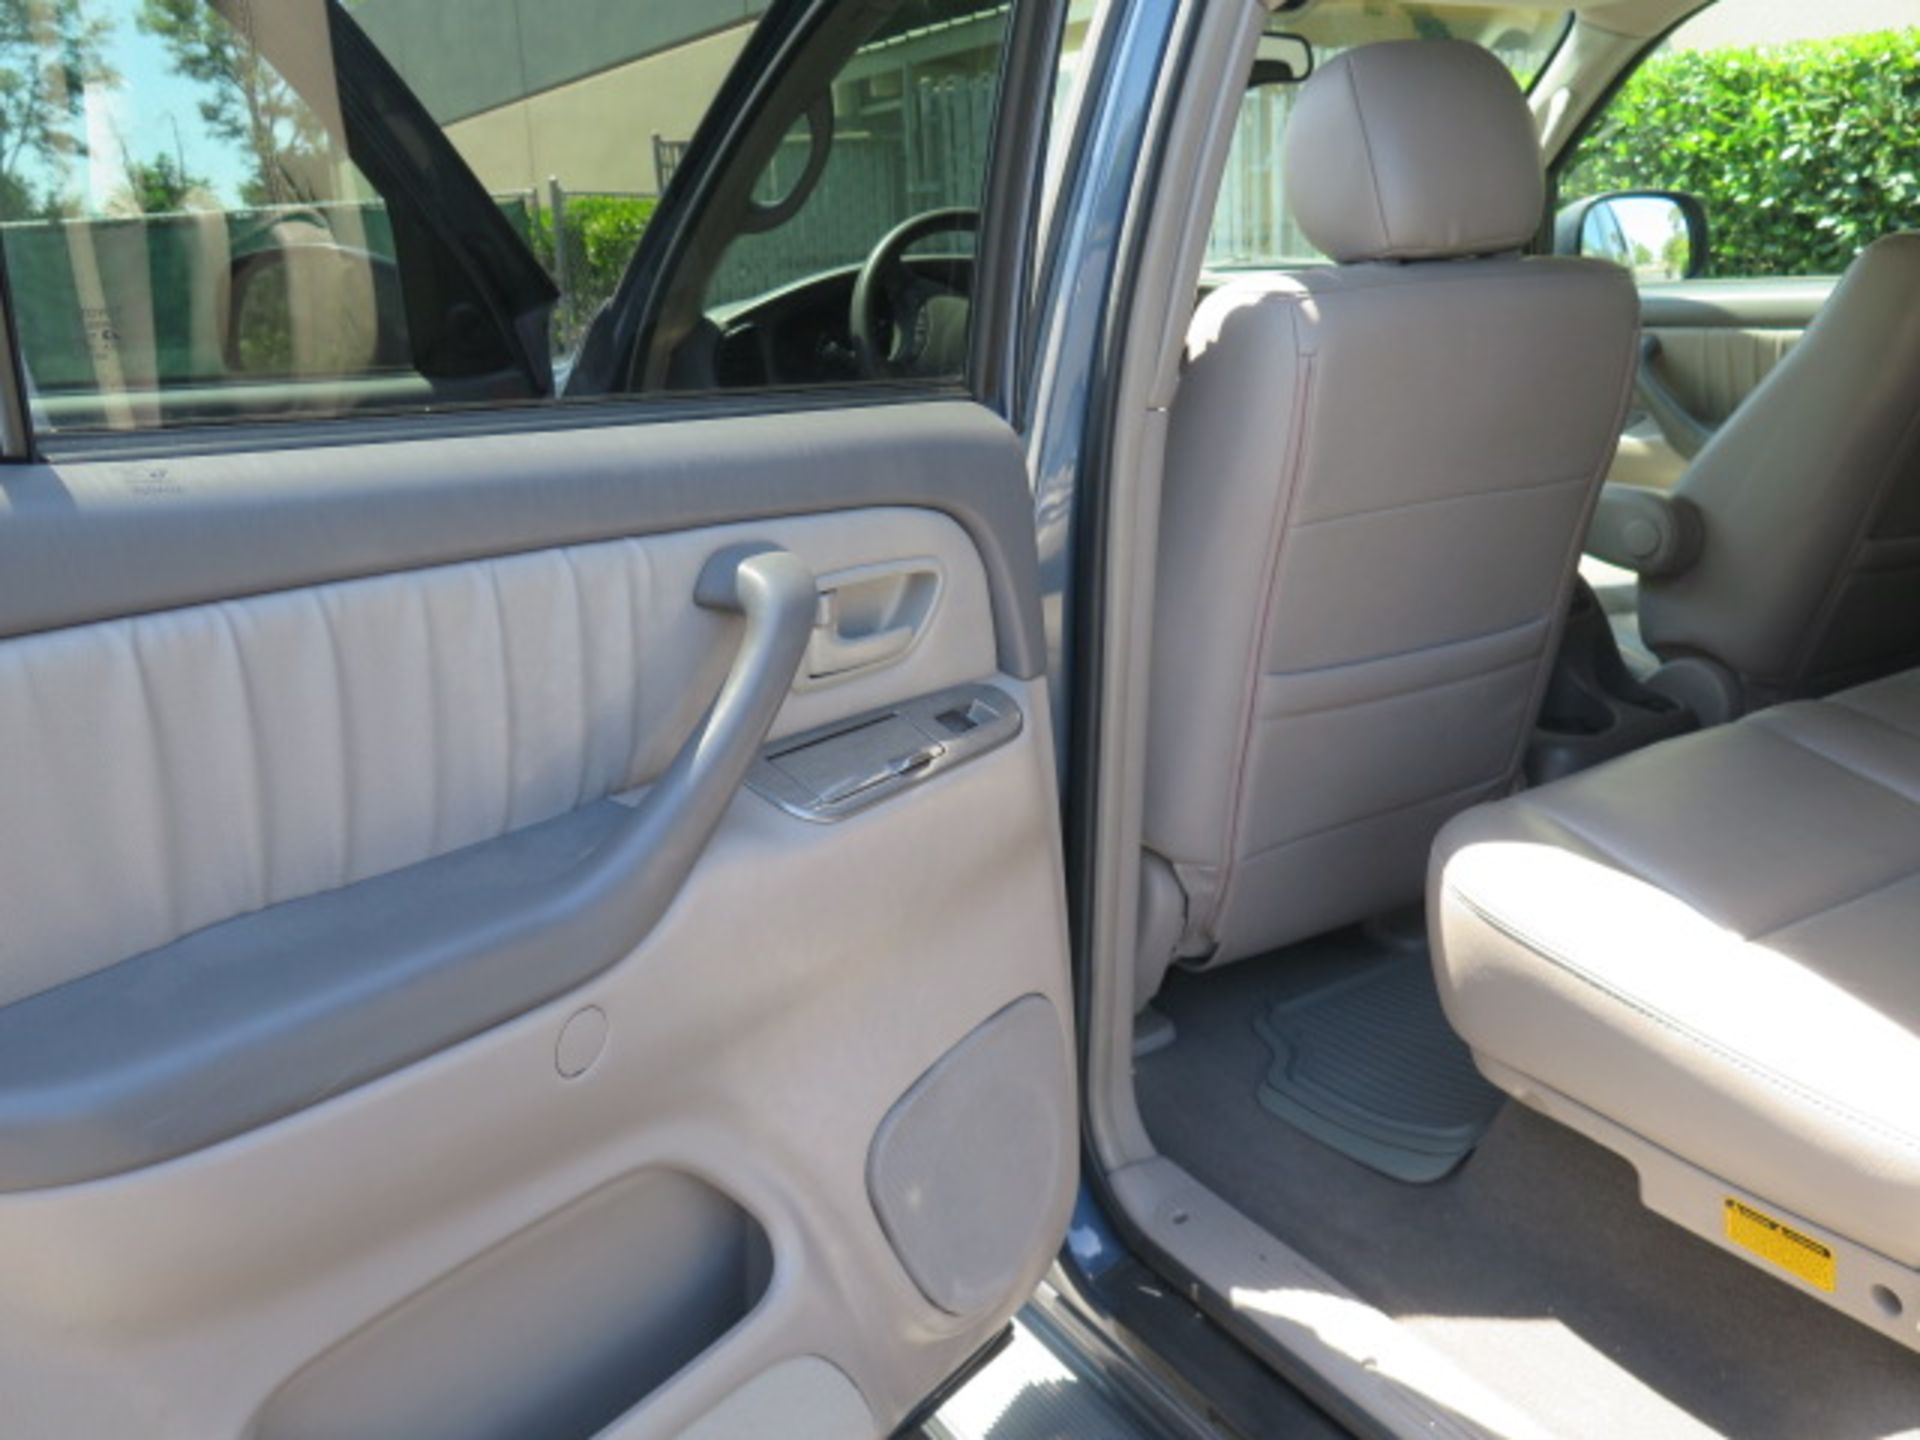 2005 Toyota Sequoia Limited SUV Lisc# 5NHN170 w/ 4.7L i-Force V8 Gas Engine, Automatic Trans, AC, - Image 10 of 14